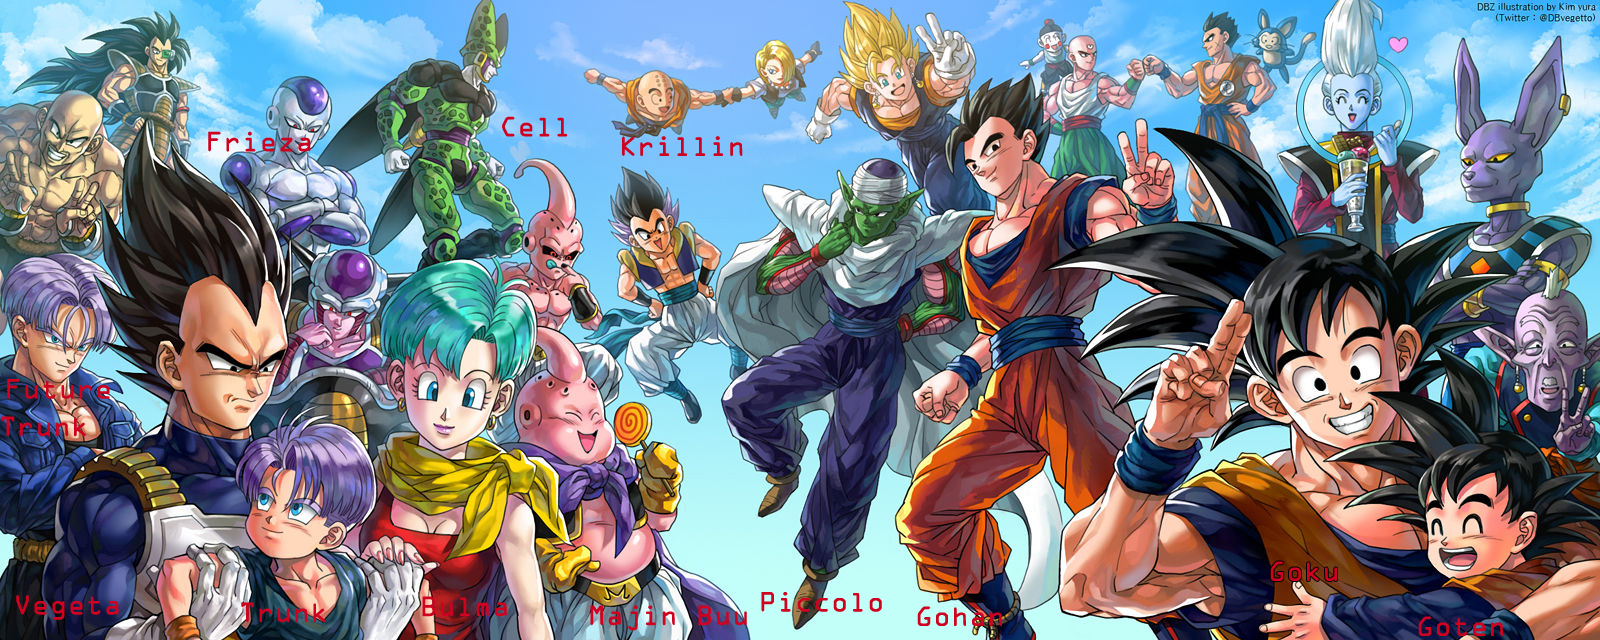 Dragon Ball Z Characters Names And Pictures - HD Wallpapers